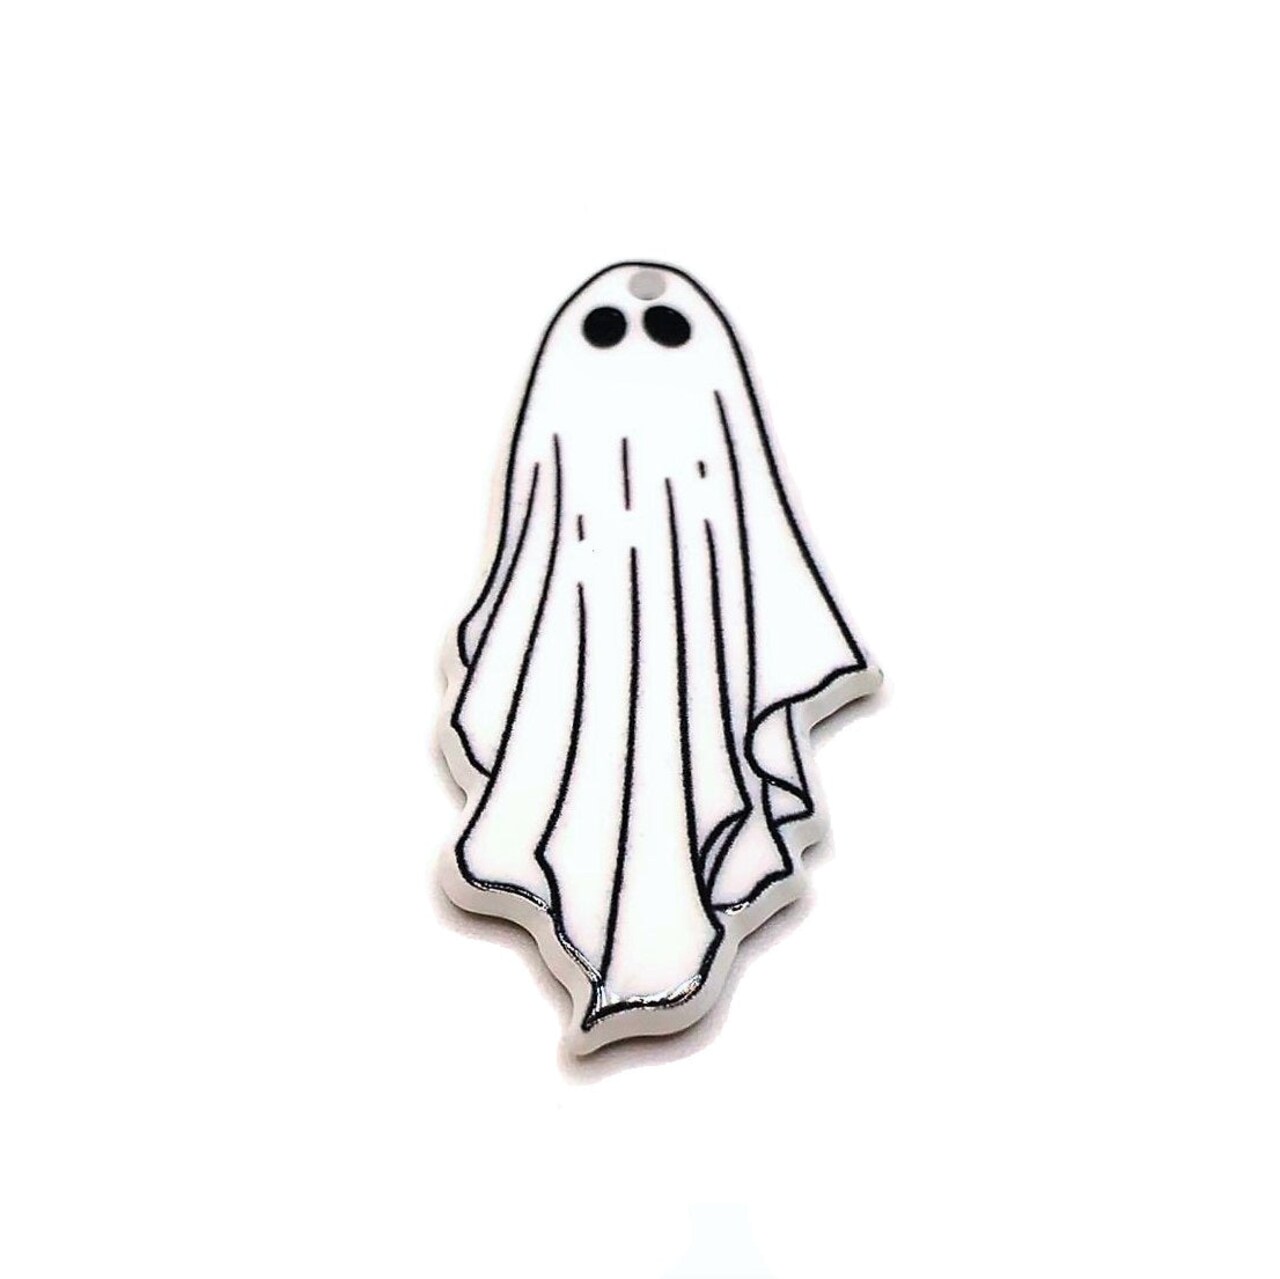 1, 4 or 20 Pieces: White Goth Ghost Halloween Charms: Double Sided